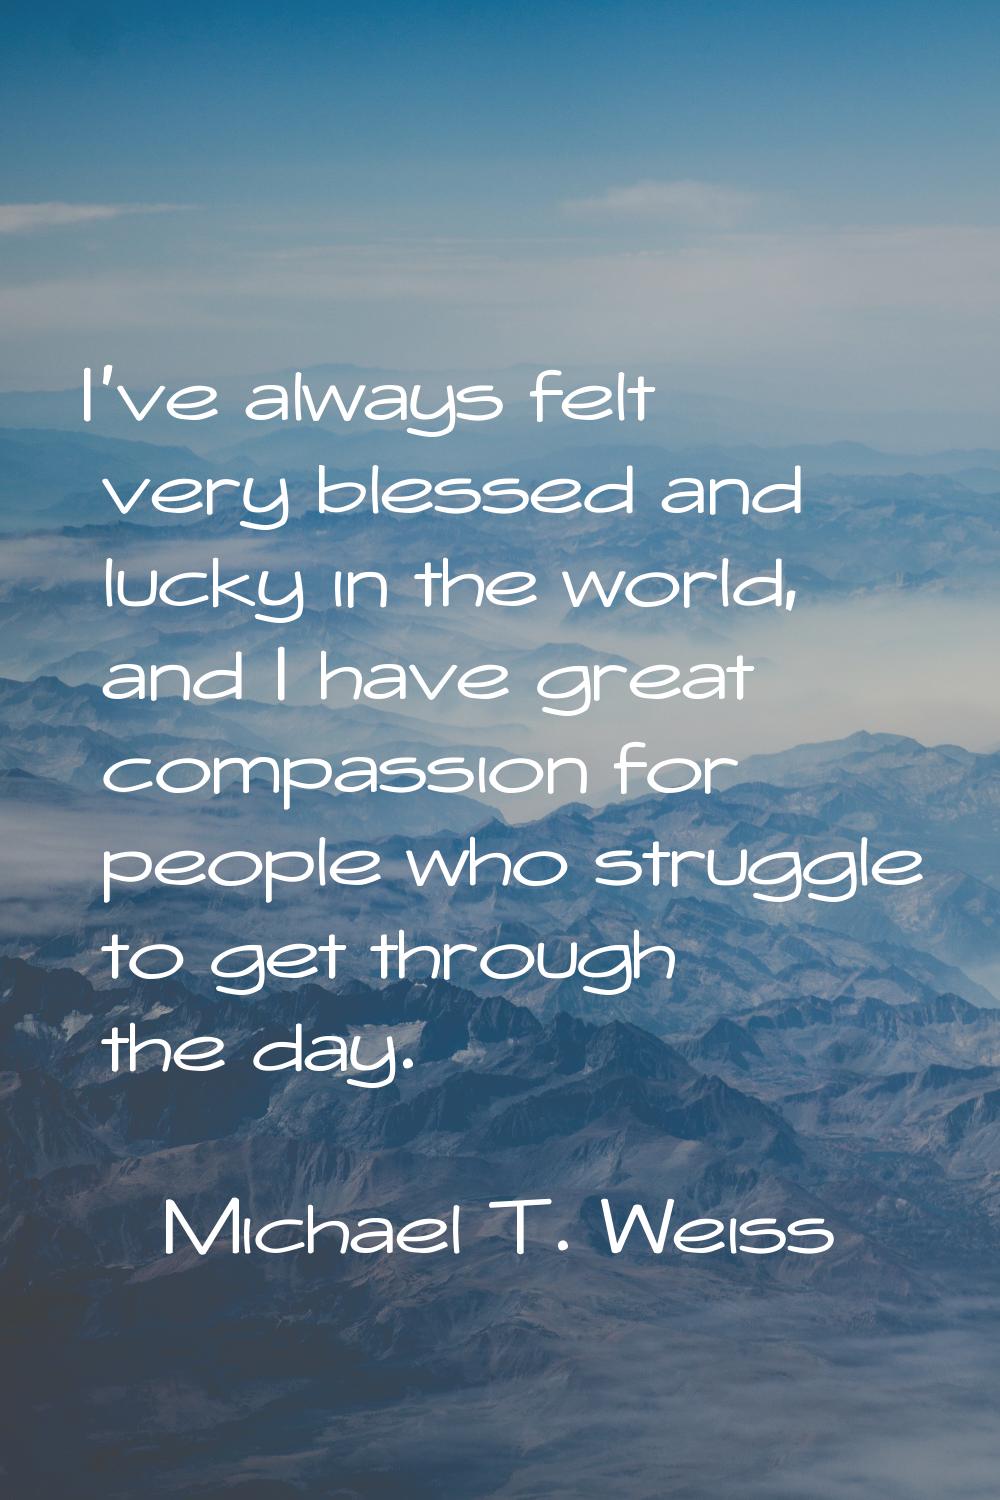 I've always felt very blessed and lucky in the world, and I have great compassion for people who st